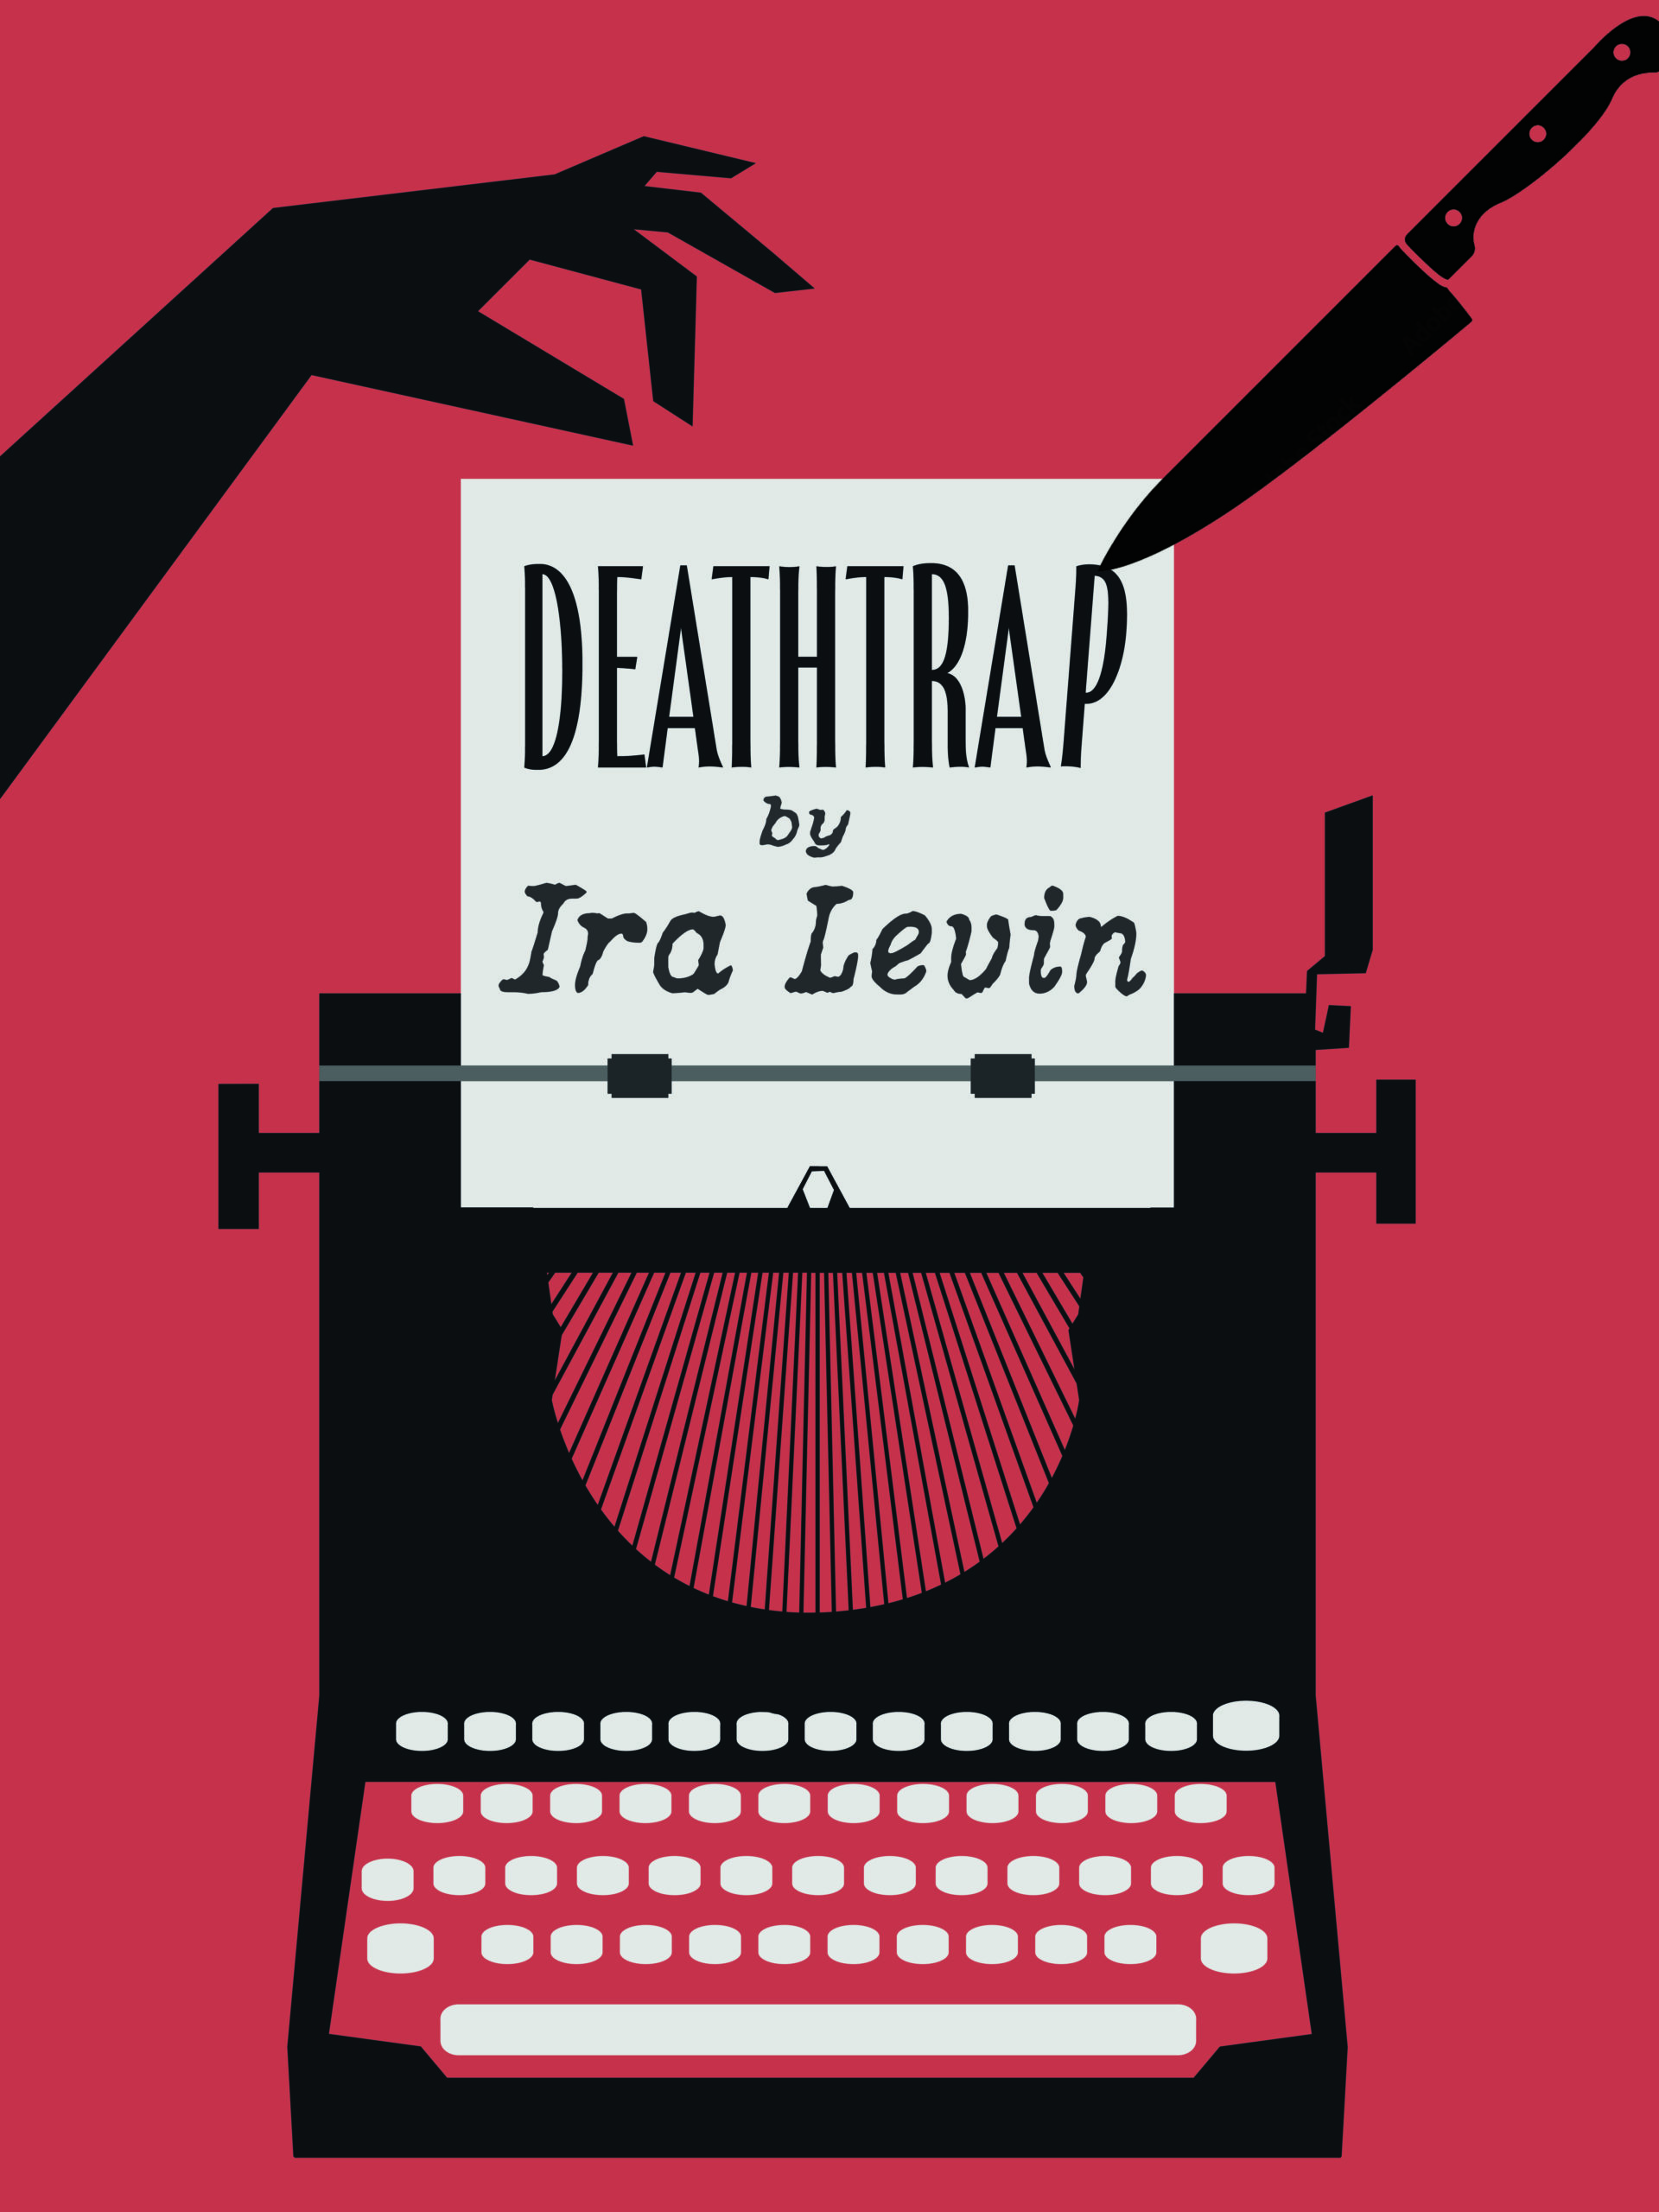 Deathtrap by Ira Levin at International City Theatre